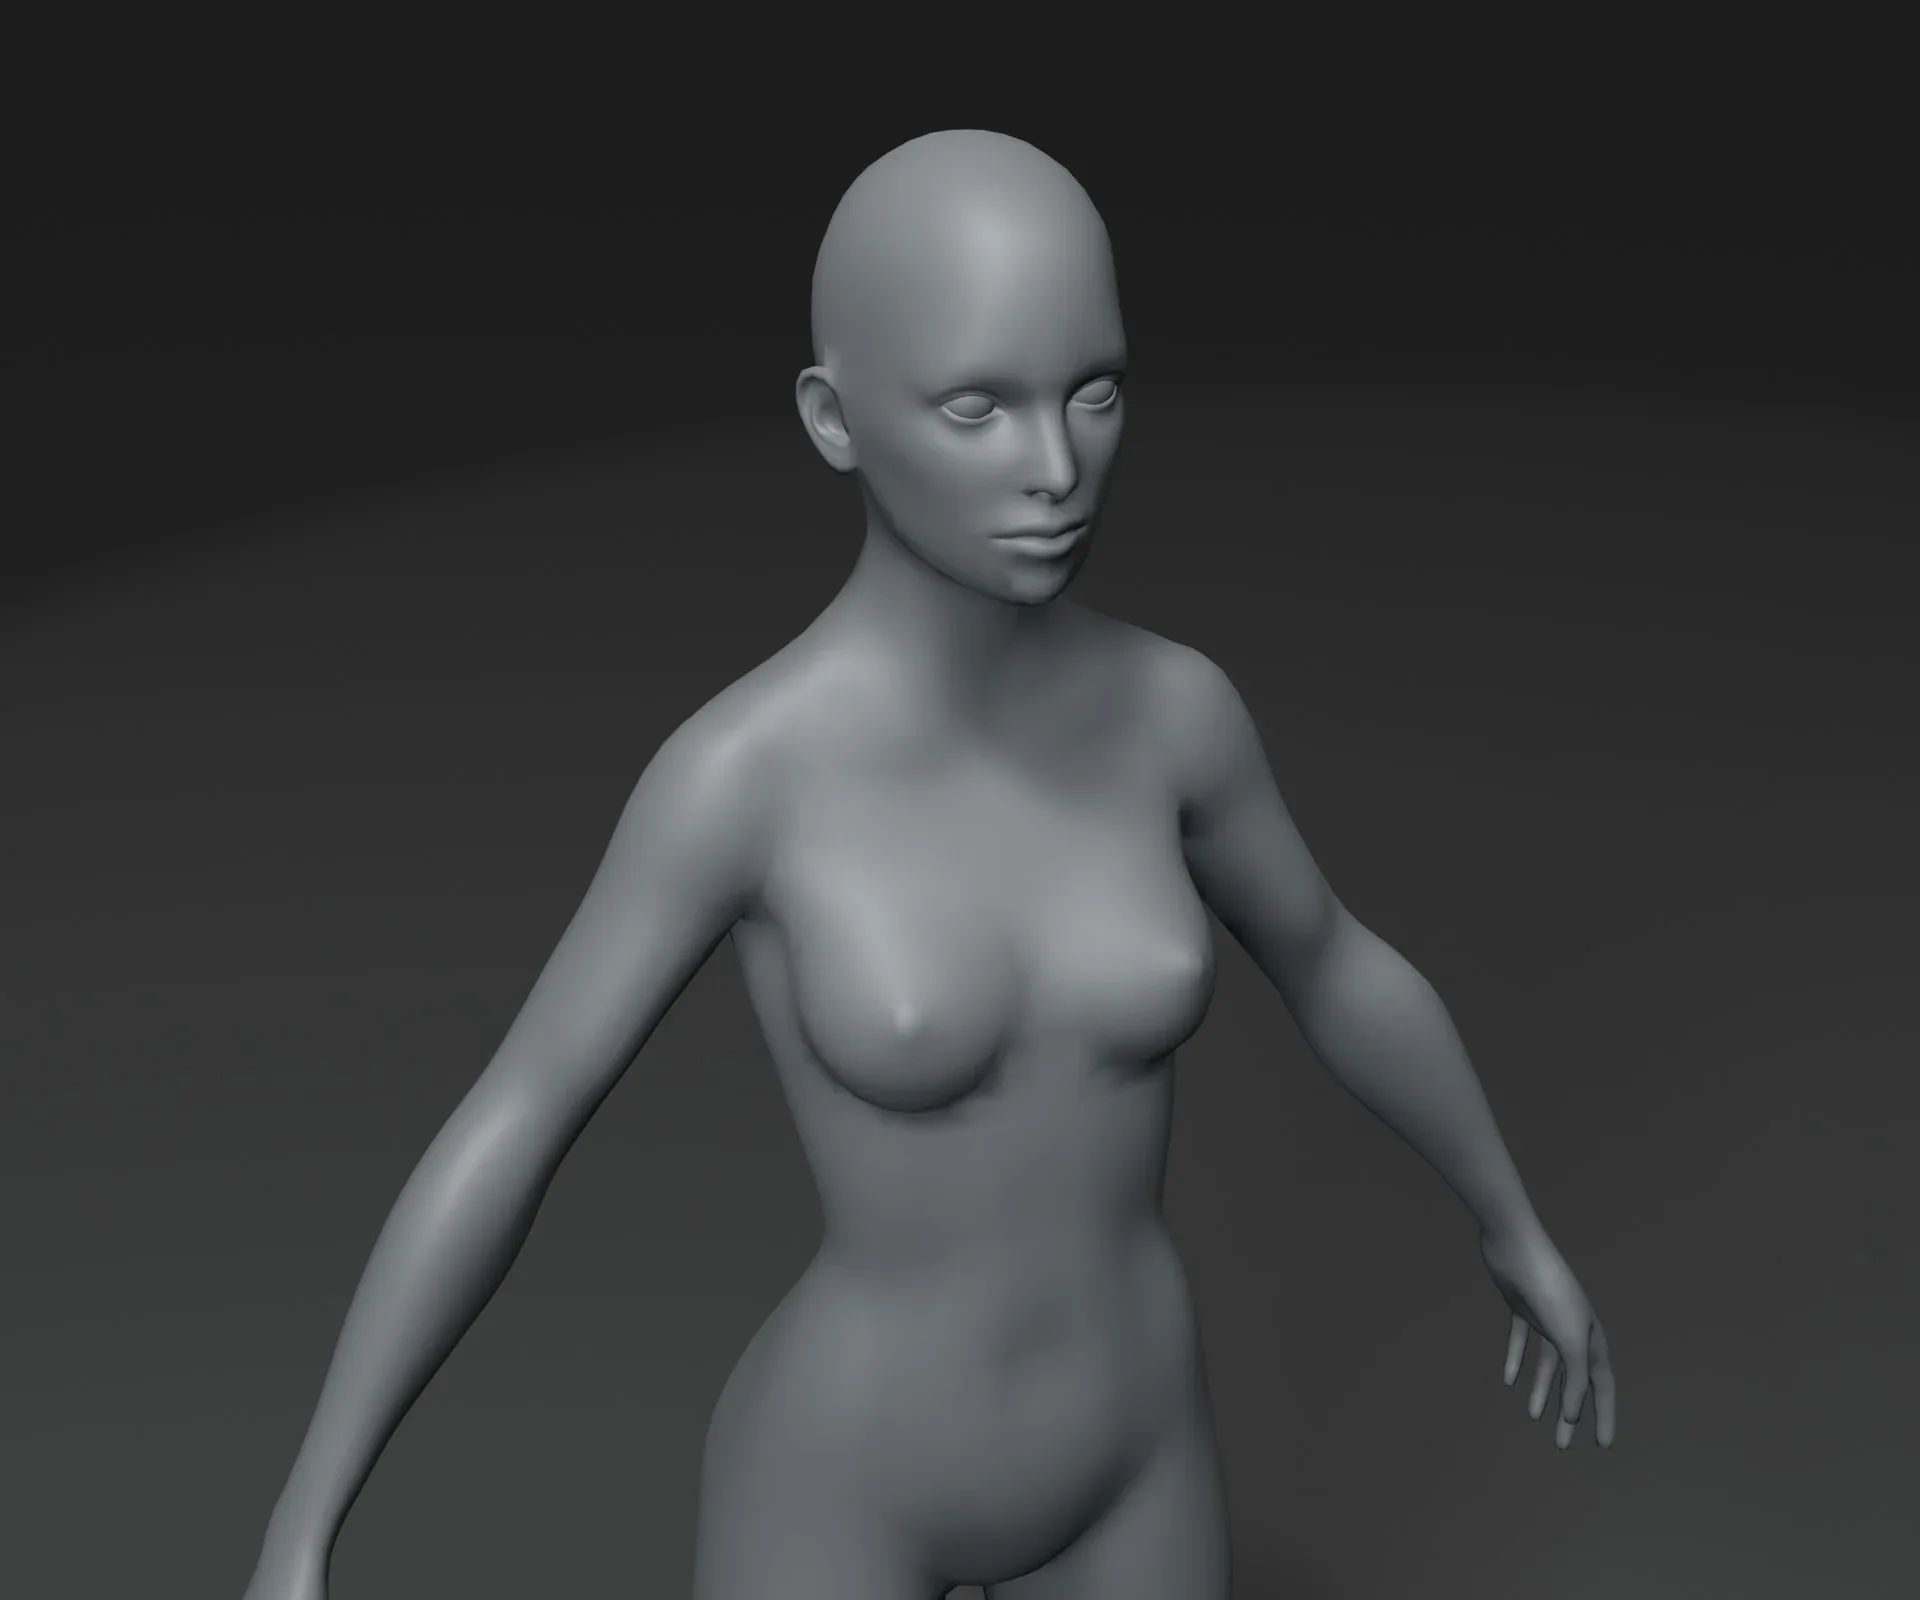 Male and Female Body Base Mesh 3D Model 20k Polygons